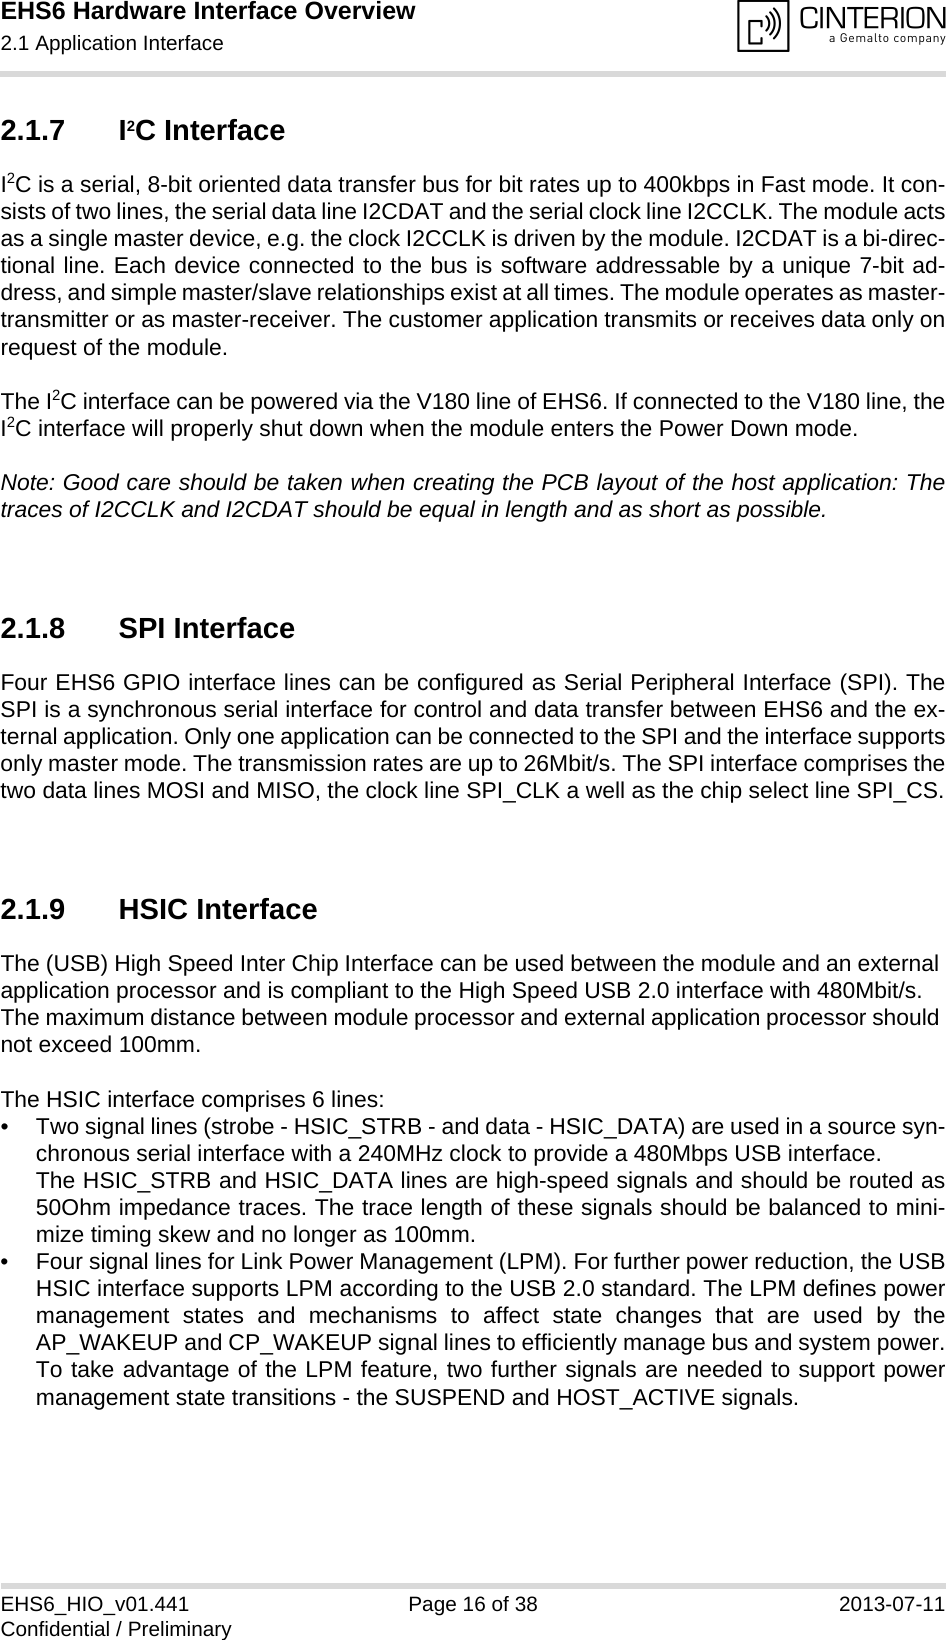 EHS6 Hardware Interface Overview2.1 Application Interface21EHS6_HIO_v01.441 Page 16 of 38 2013-07-11Confidential / Preliminary2.1.7 I2C InterfaceI2C is a serial, 8-bit oriented data transfer bus for bit rates up to 400kbps in Fast mode. It con-sists of two lines, the serial data line I2CDAT and the serial clock line I2CCLK. The module actsas a single master device, e.g. the clock I2CCLK is driven by the module. I2CDAT is a bi-direc-tional line. Each device connected to the bus is software addressable by a unique 7-bit ad-dress, and simple master/slave relationships exist at all times. The module operates as master-transmitter or as master-receiver. The customer application transmits or receives data only onrequest of the module.The I2C interface can be powered via the V180 line of EHS6. If connected to the V180 line, theI2C interface will properly shut down when the module enters the Power Down mode.Note: Good care should be taken when creating the PCB layout of the host application: Thetraces of I2CCLK and I2CDAT should be equal in length and as short as possible.2.1.8 SPI InterfaceFour EHS6 GPIO interface lines can be configured as Serial Peripheral Interface (SPI). TheSPI is a synchronous serial interface for control and data transfer between EHS6 and the ex-ternal application. Only one application can be connected to the SPI and the interface supportsonly master mode. The transmission rates are up to 26Mbit/s. The SPI interface comprises thetwo data lines MOSI and MISO, the clock line SPI_CLK a well as the chip select line SPI_CS.2.1.9 HSIC InterfaceThe (USB) High Speed Inter Chip Interface can be used between the module and an external application processor and is compliant to the High Speed USB 2.0 interface with 480Mbit/s. The maximum distance between module processor and external application processor should not exceed 100mm.The HSIC interface comprises 6 lines:• Two signal lines (strobe - HSIC_STRB - and data - HSIC_DATA) are used in a source syn-chronous serial interface with a 240MHz clock to provide a 480Mbps USB interface. The HSIC_STRB and HSIC_DATA lines are high-speed signals and should be routed as50Ohm impedance traces. The trace length of these signals should be balanced to mini-mize timing skew and no longer as 100mm.• Four signal lines for Link Power Management (LPM). For further power reduction, the USBHSIC interface supports LPM according to the USB 2.0 standard. The LPM defines powermanagement states and mechanisms to affect state changes that are used by theAP_WAKEUP and CP_WAKEUP signal lines to efficiently manage bus and system power.To take advantage of the LPM feature, two further signals are needed to support powermanagement state transitions - the SUSPEND and HOST_ACTIVE signals.